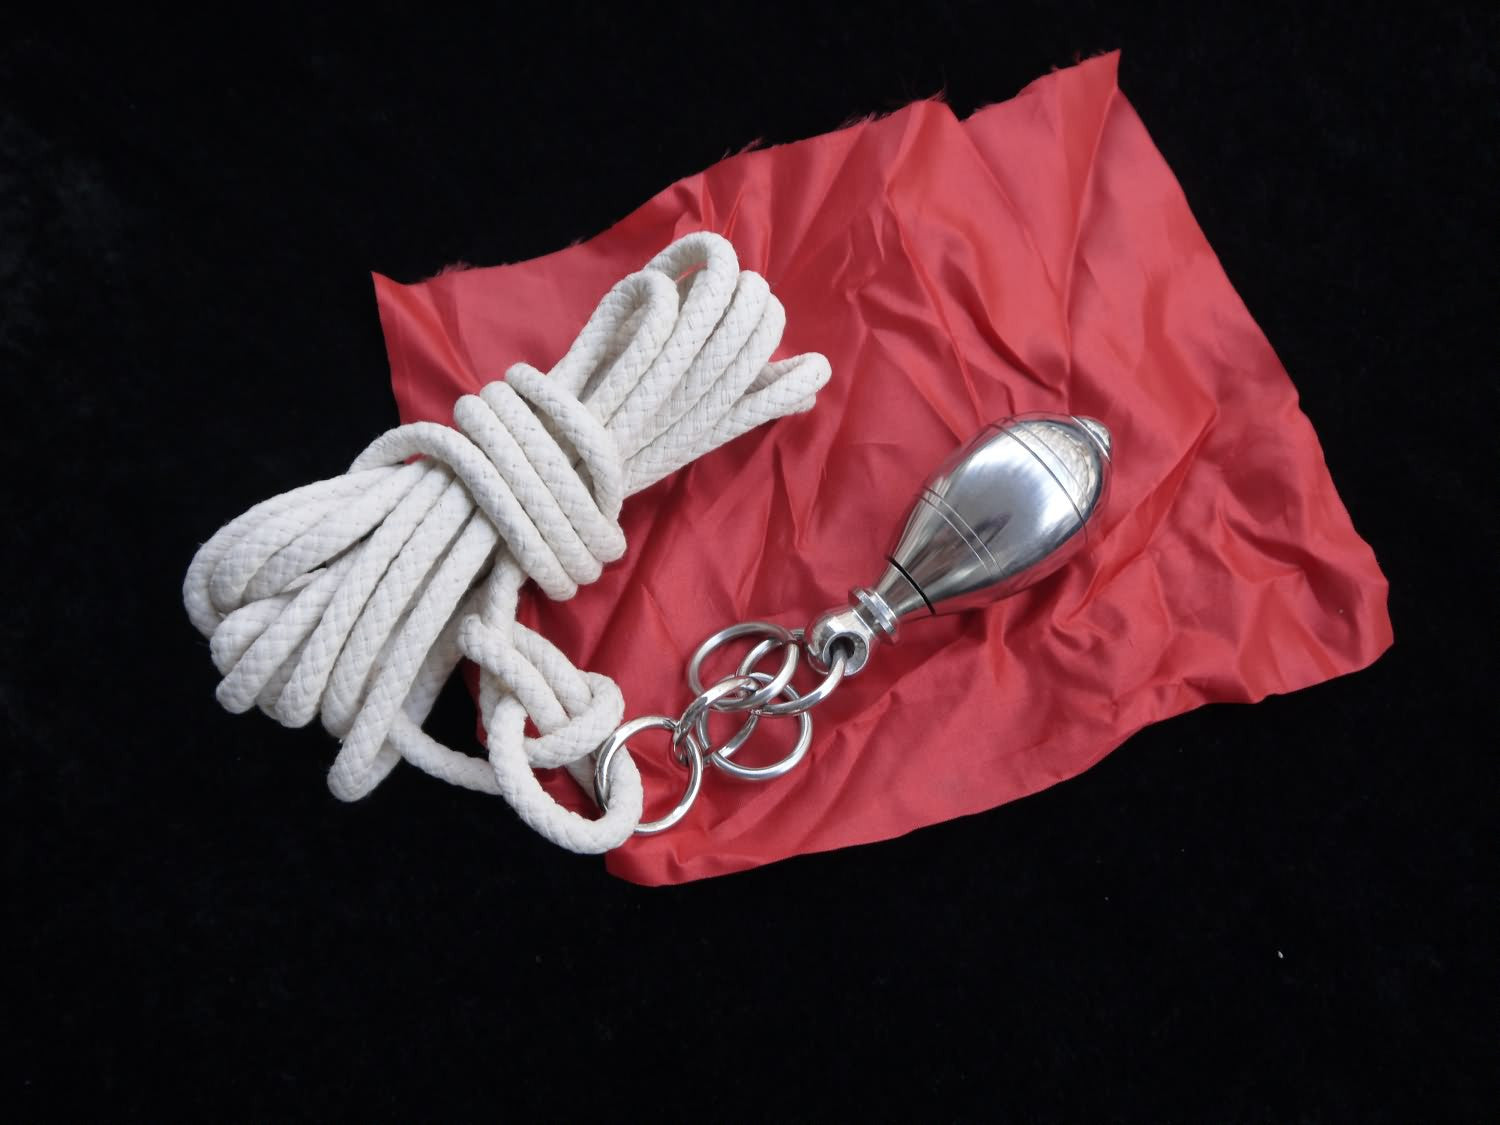 Meteor Hammer/Stainless steel/Rope 4M/Chinese martial arts/Kung fu - Chinese sword shop